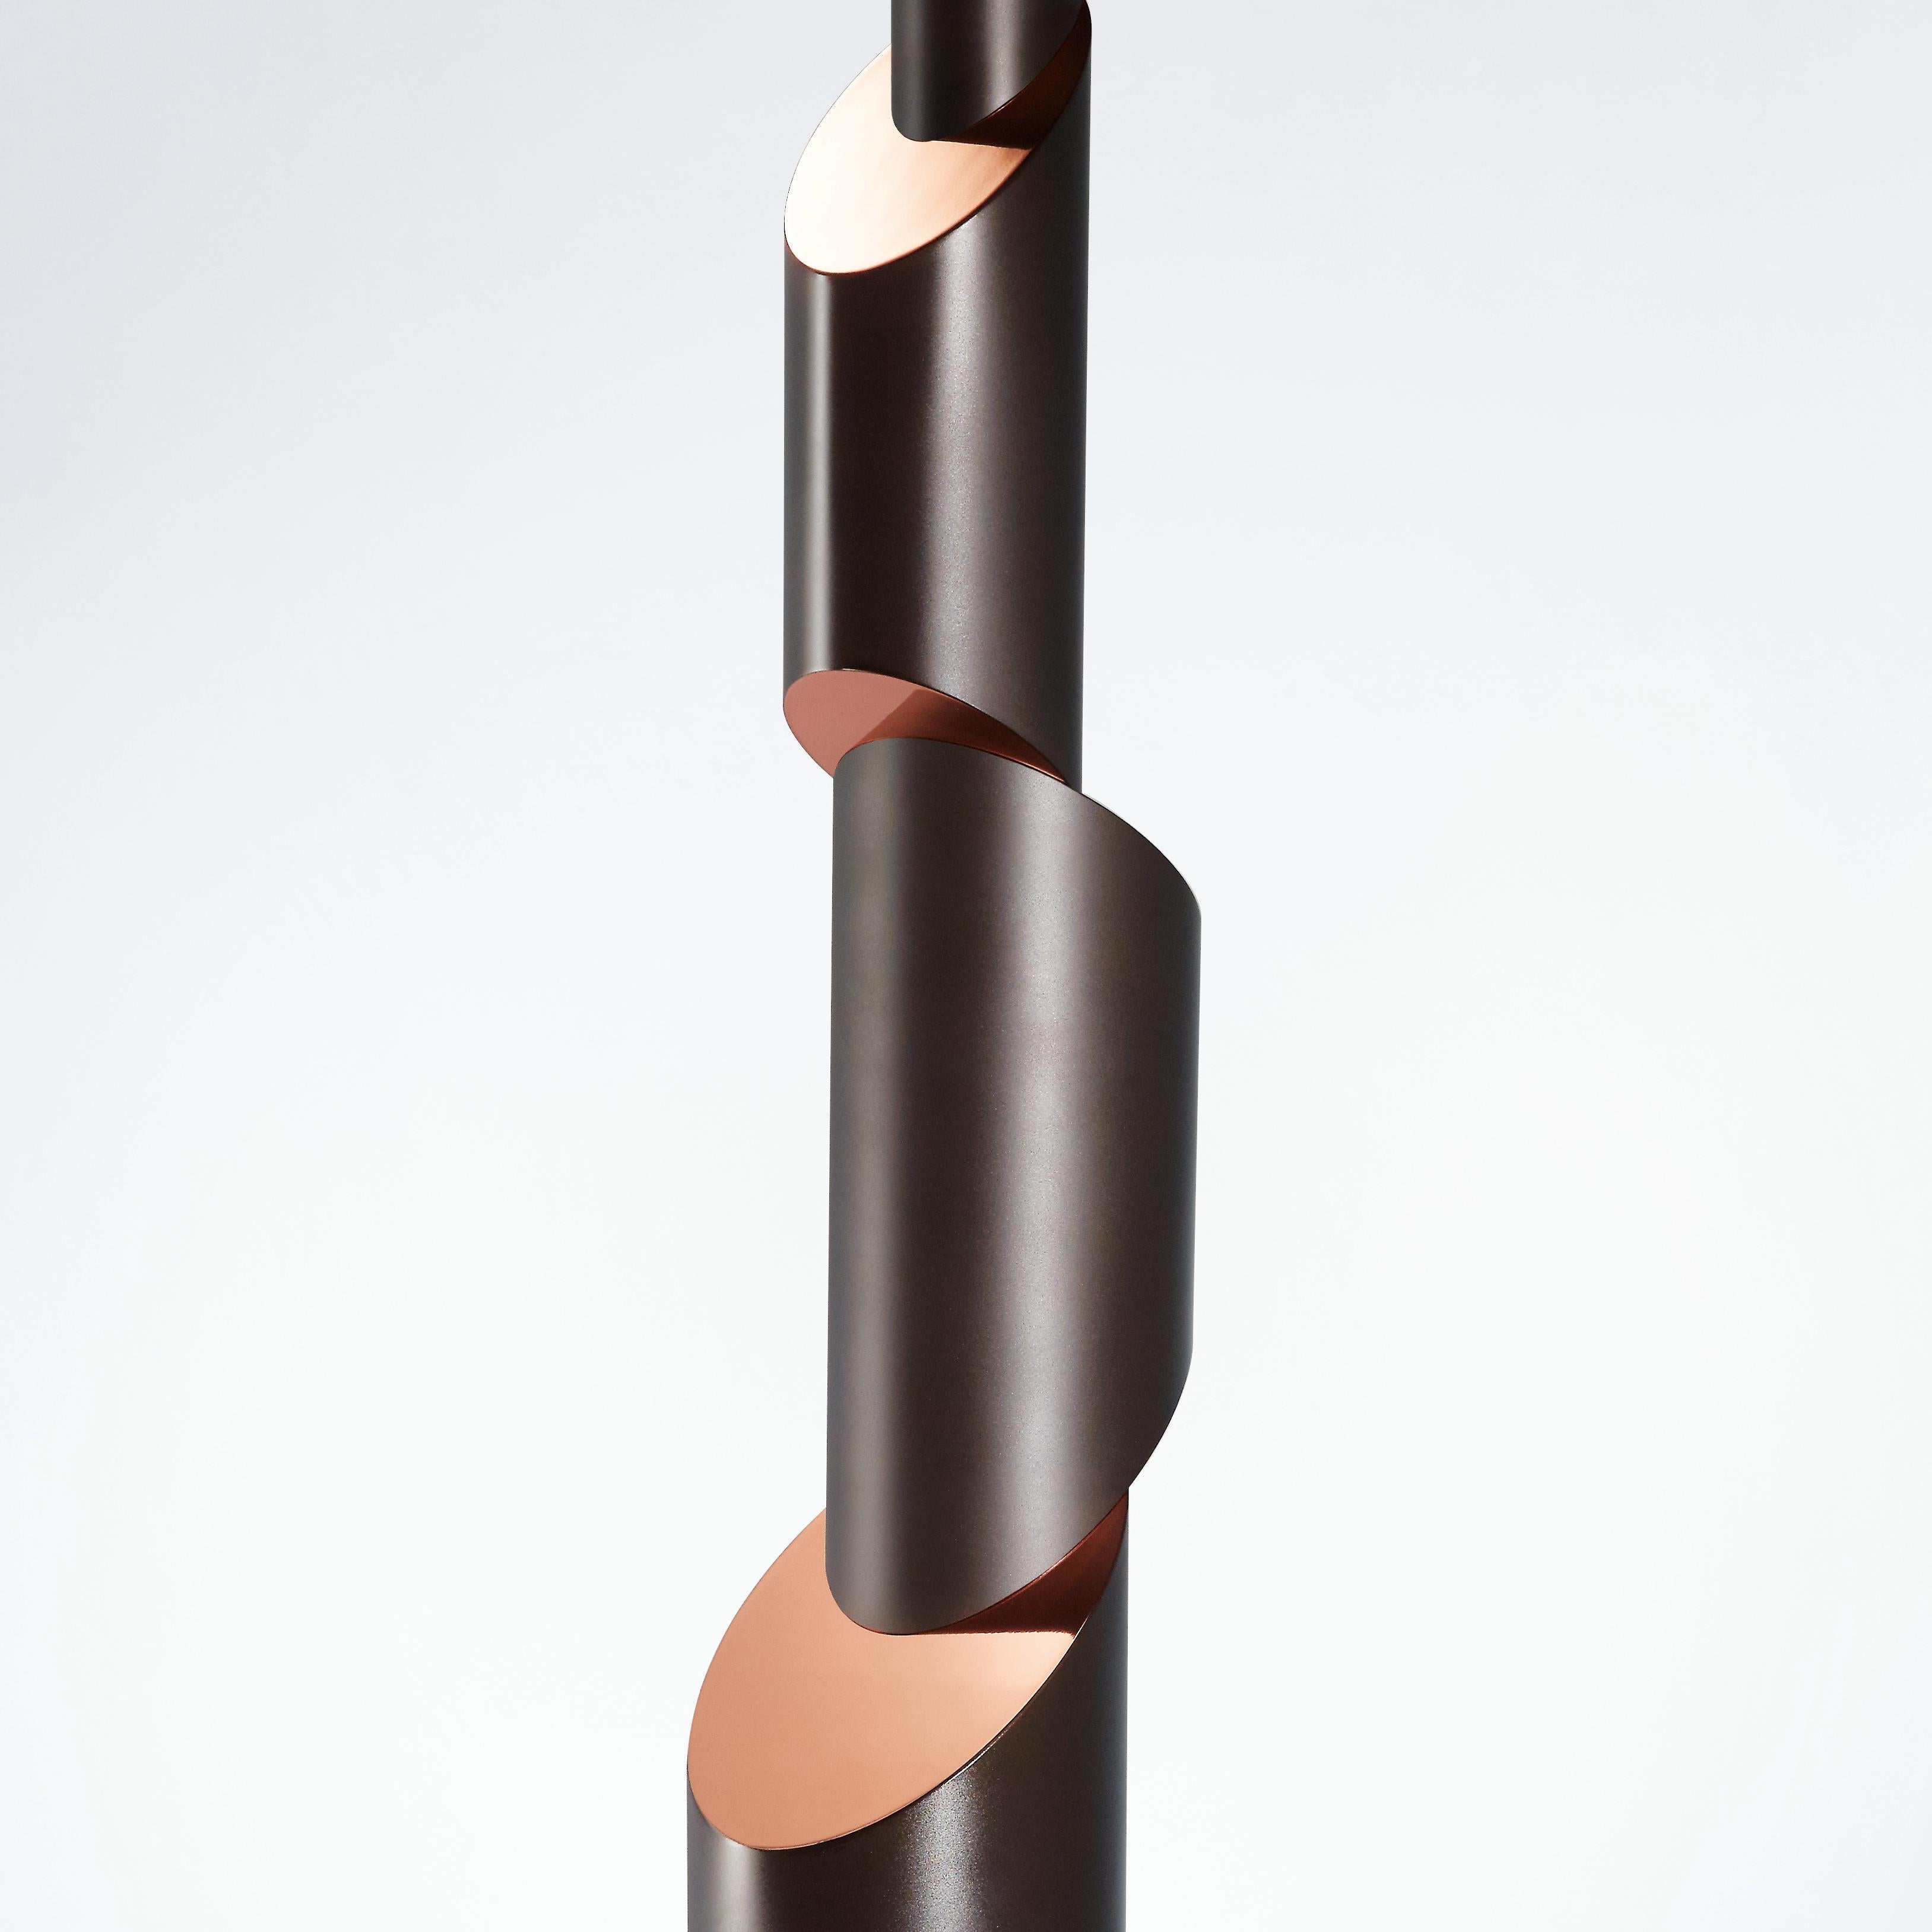 French 21st Century Design Totem I Floor lamp with Smoked Nickel and Copper Finish